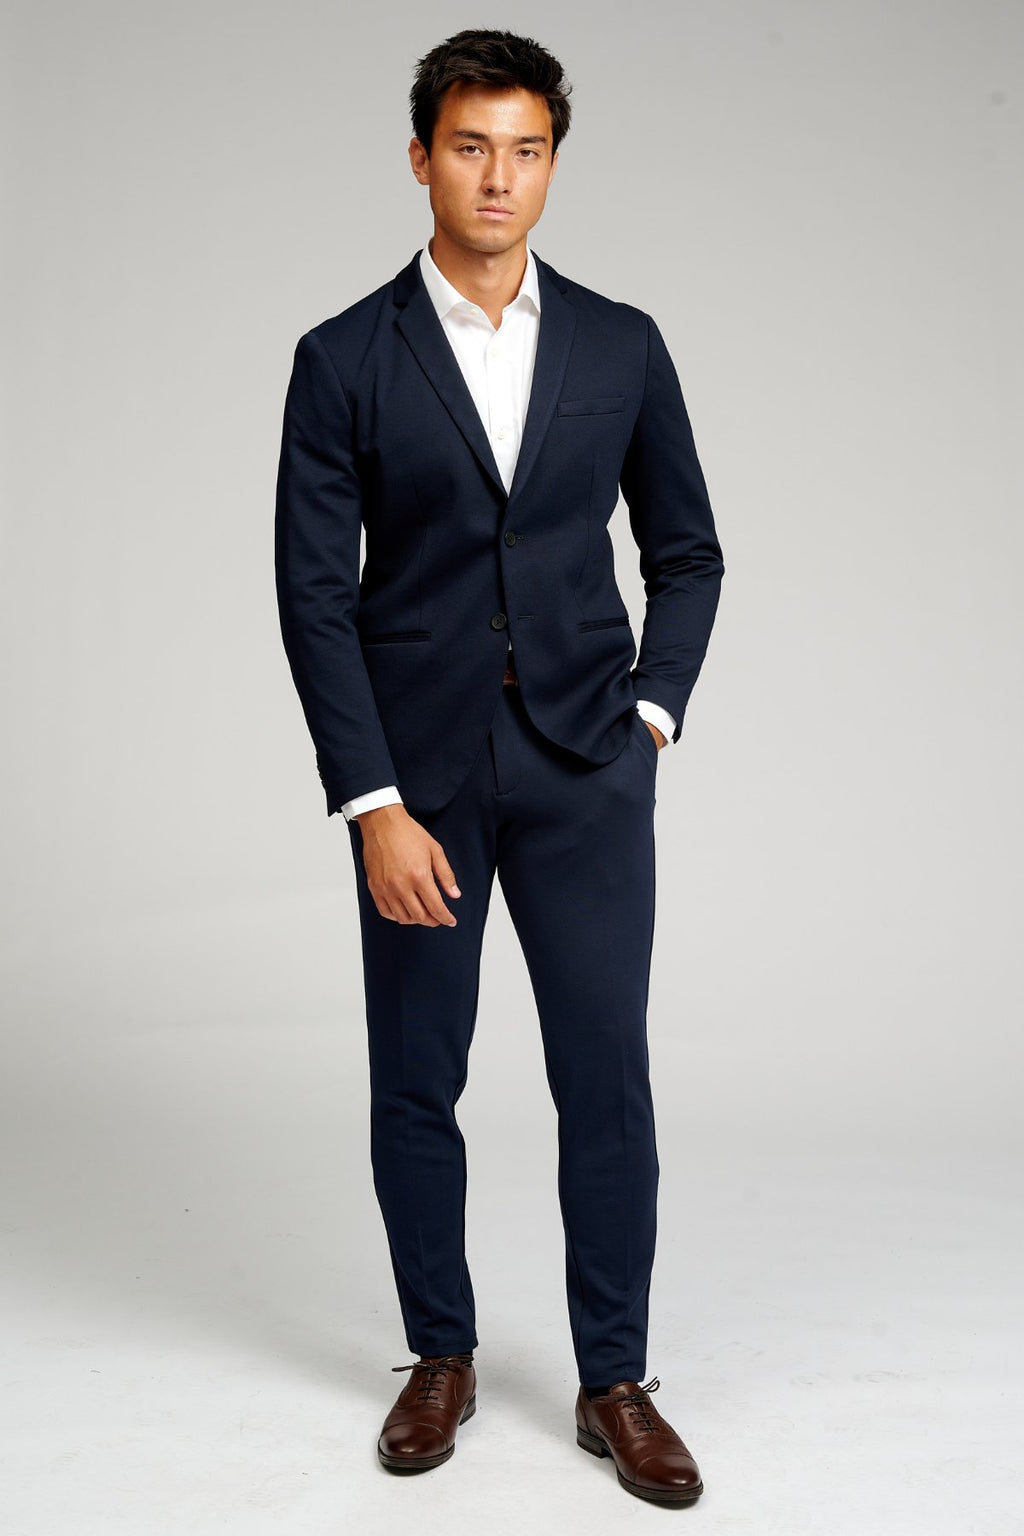 The Original Performance Suit™️ (Navy) - Package Deal